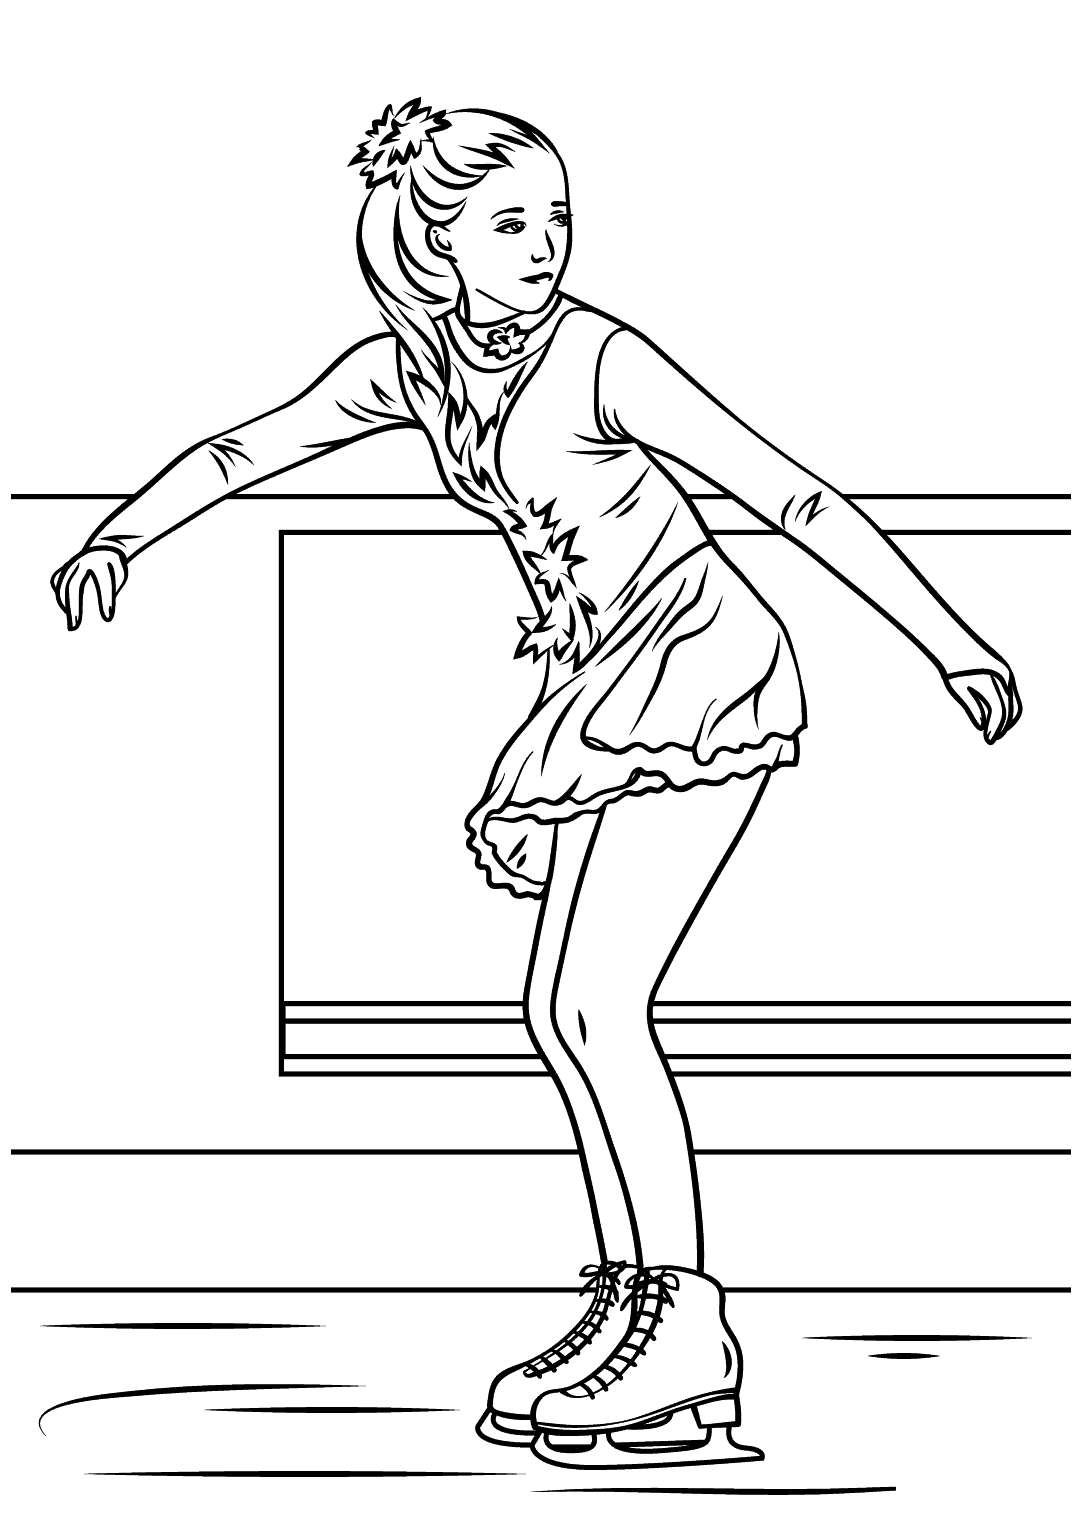 usa-winter-olympics-coloring-pages-kids